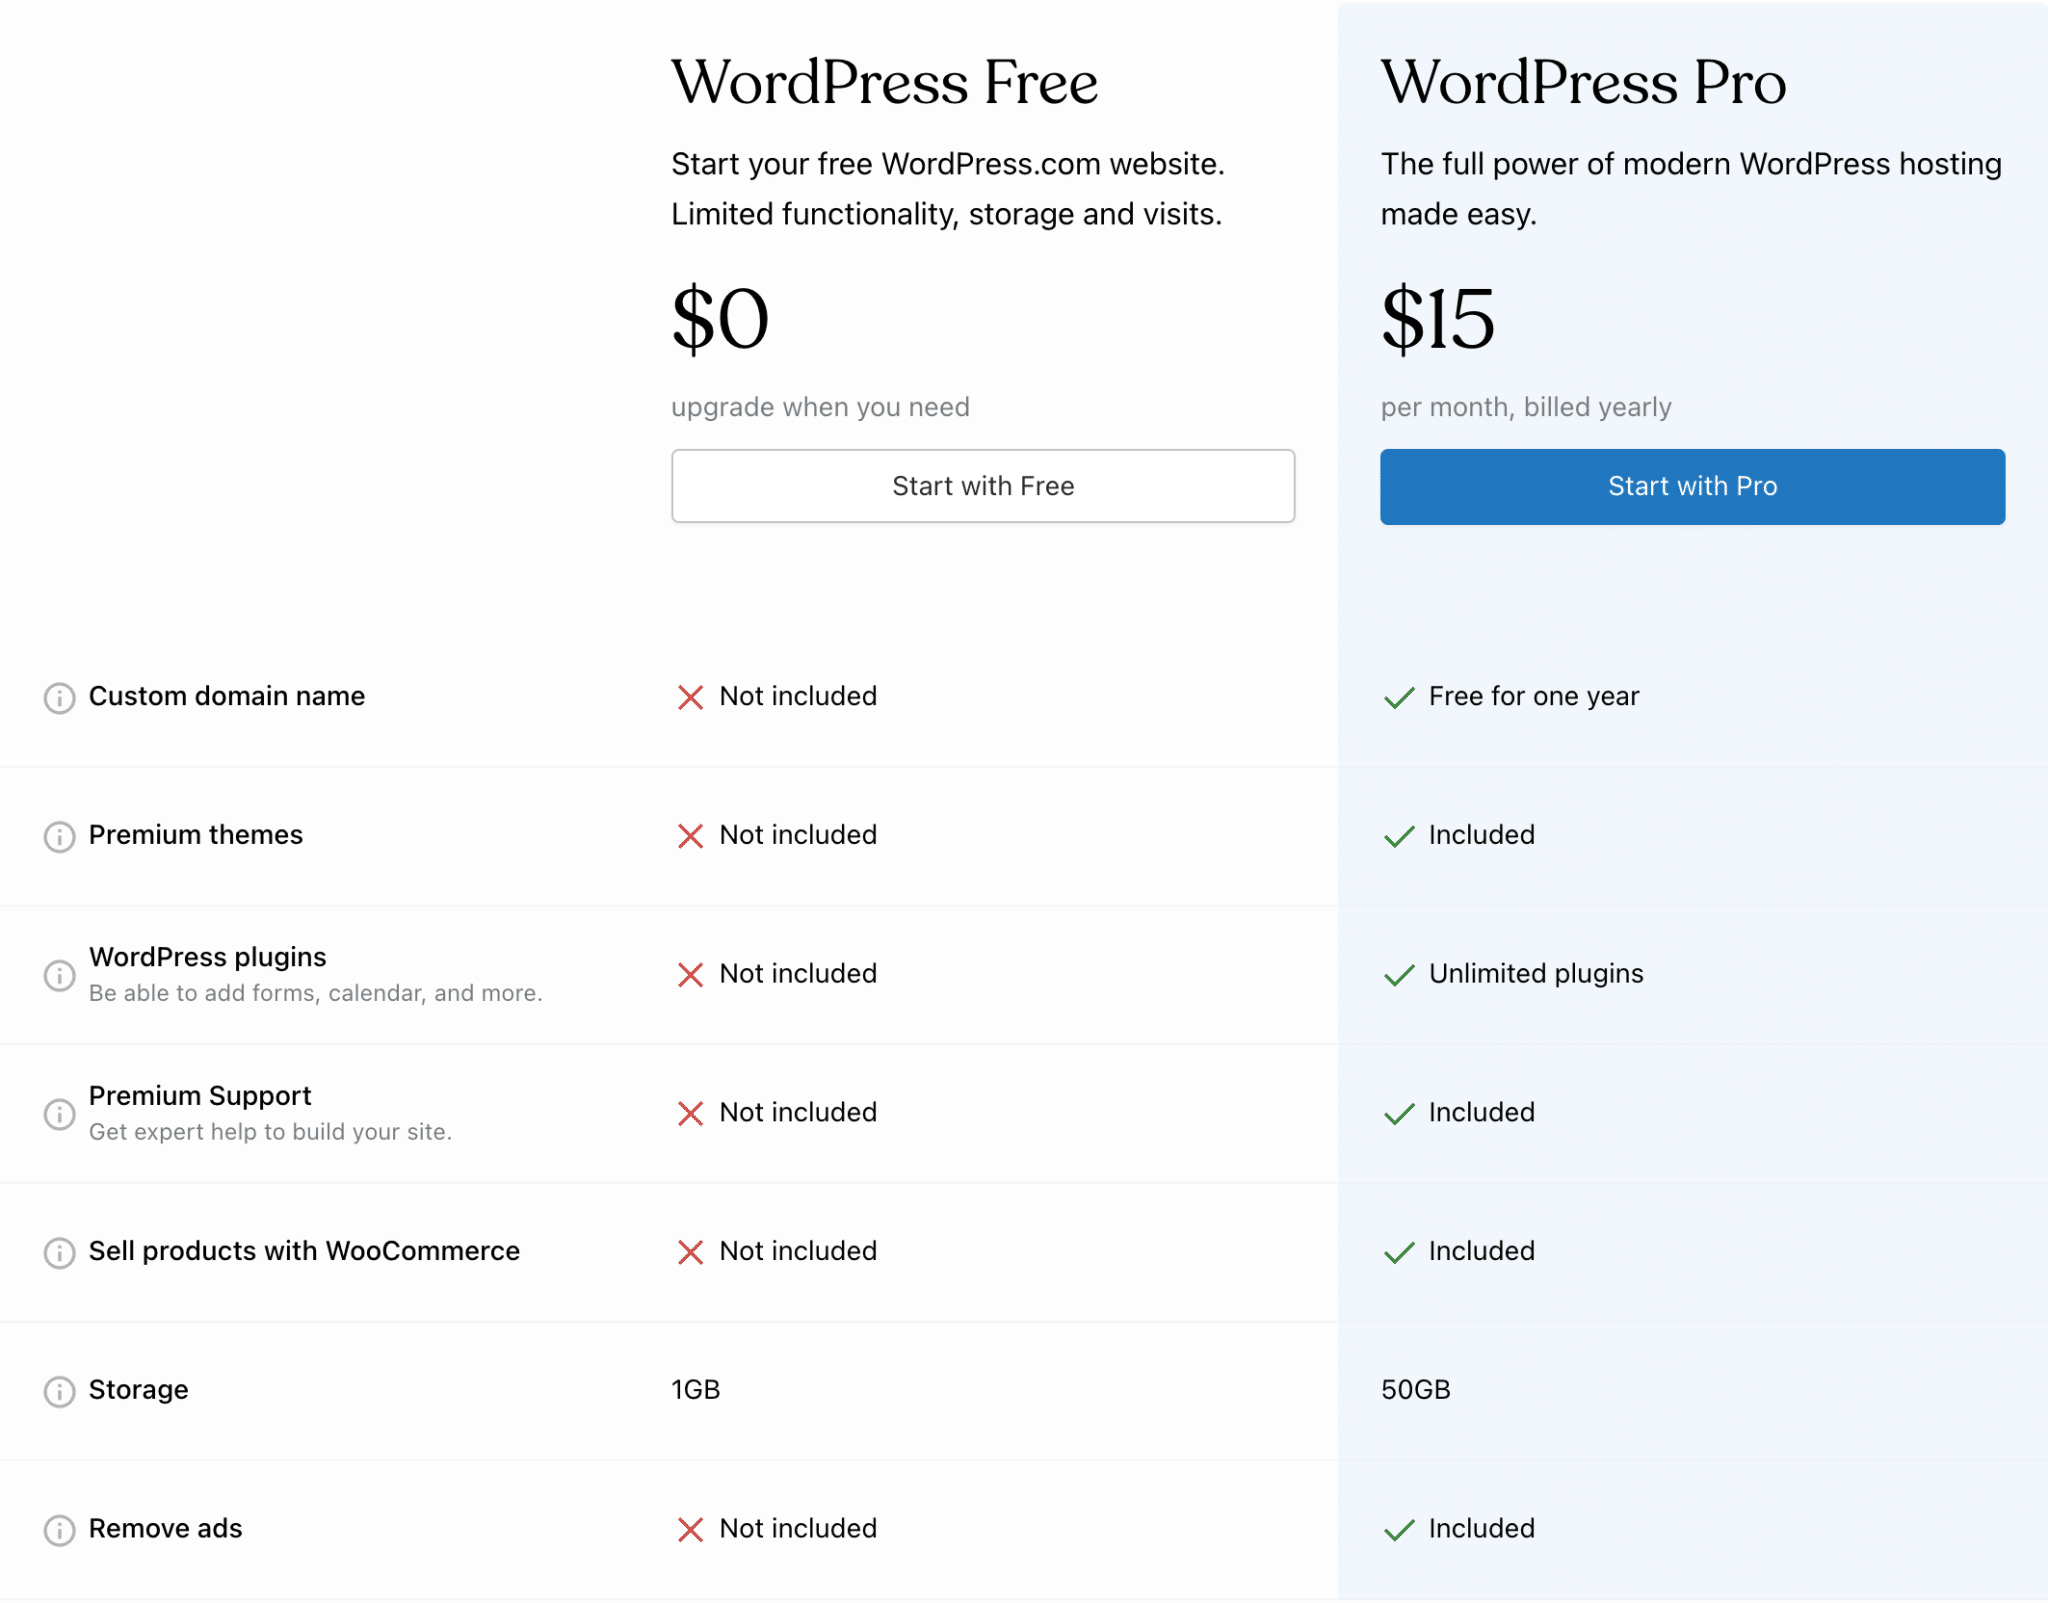 Plans and pricing of WordPress.com